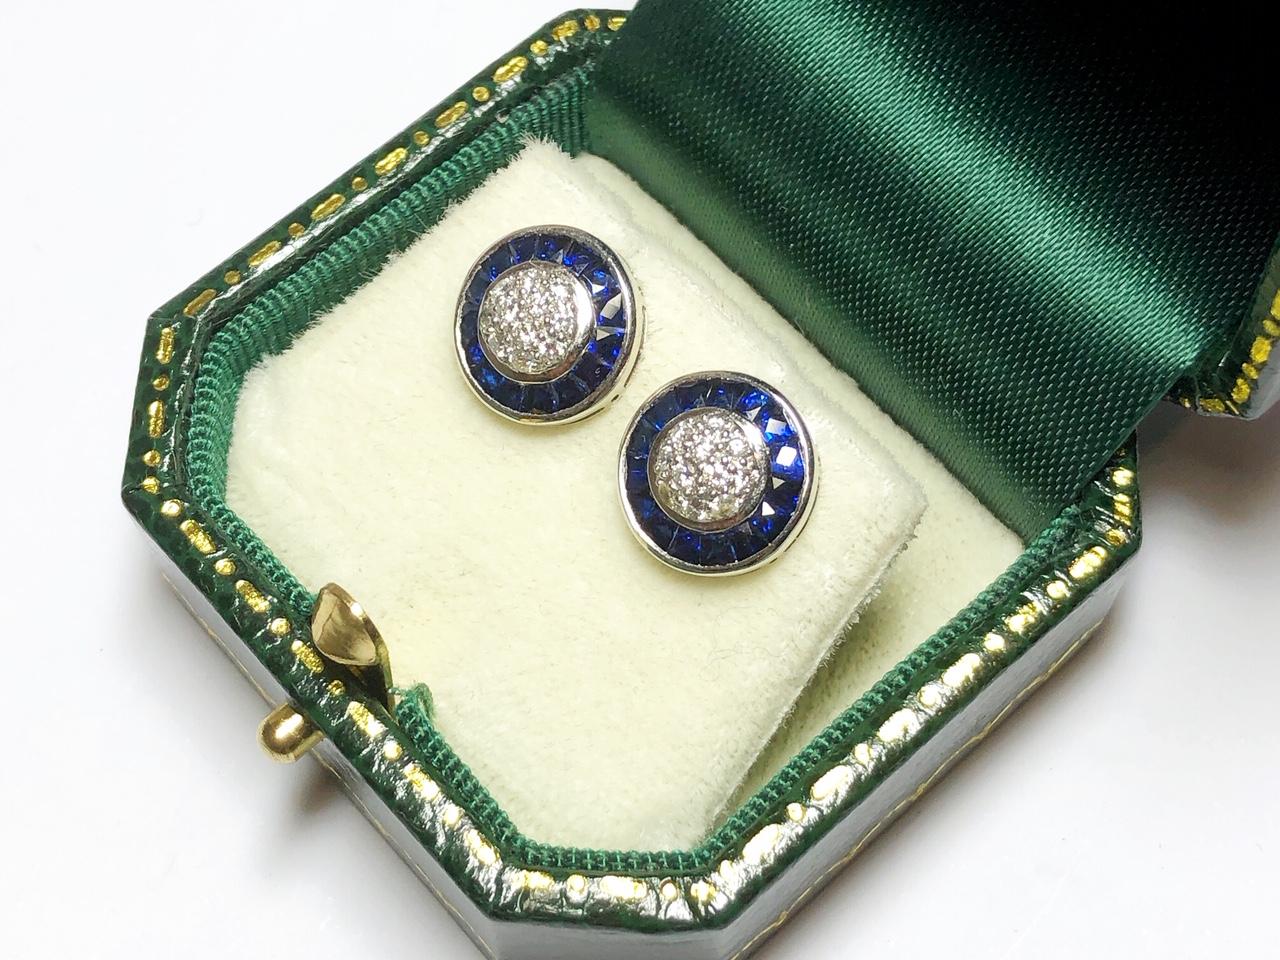 A pair of sapphire and diamond cluster earrings, set with an estimated 0.31ct of pavé set round brilliant cut diamonds to the centre, surrounded by an estimated 1.89ct of calibre French cut sapphires, mounted in platinum, post and butterfly